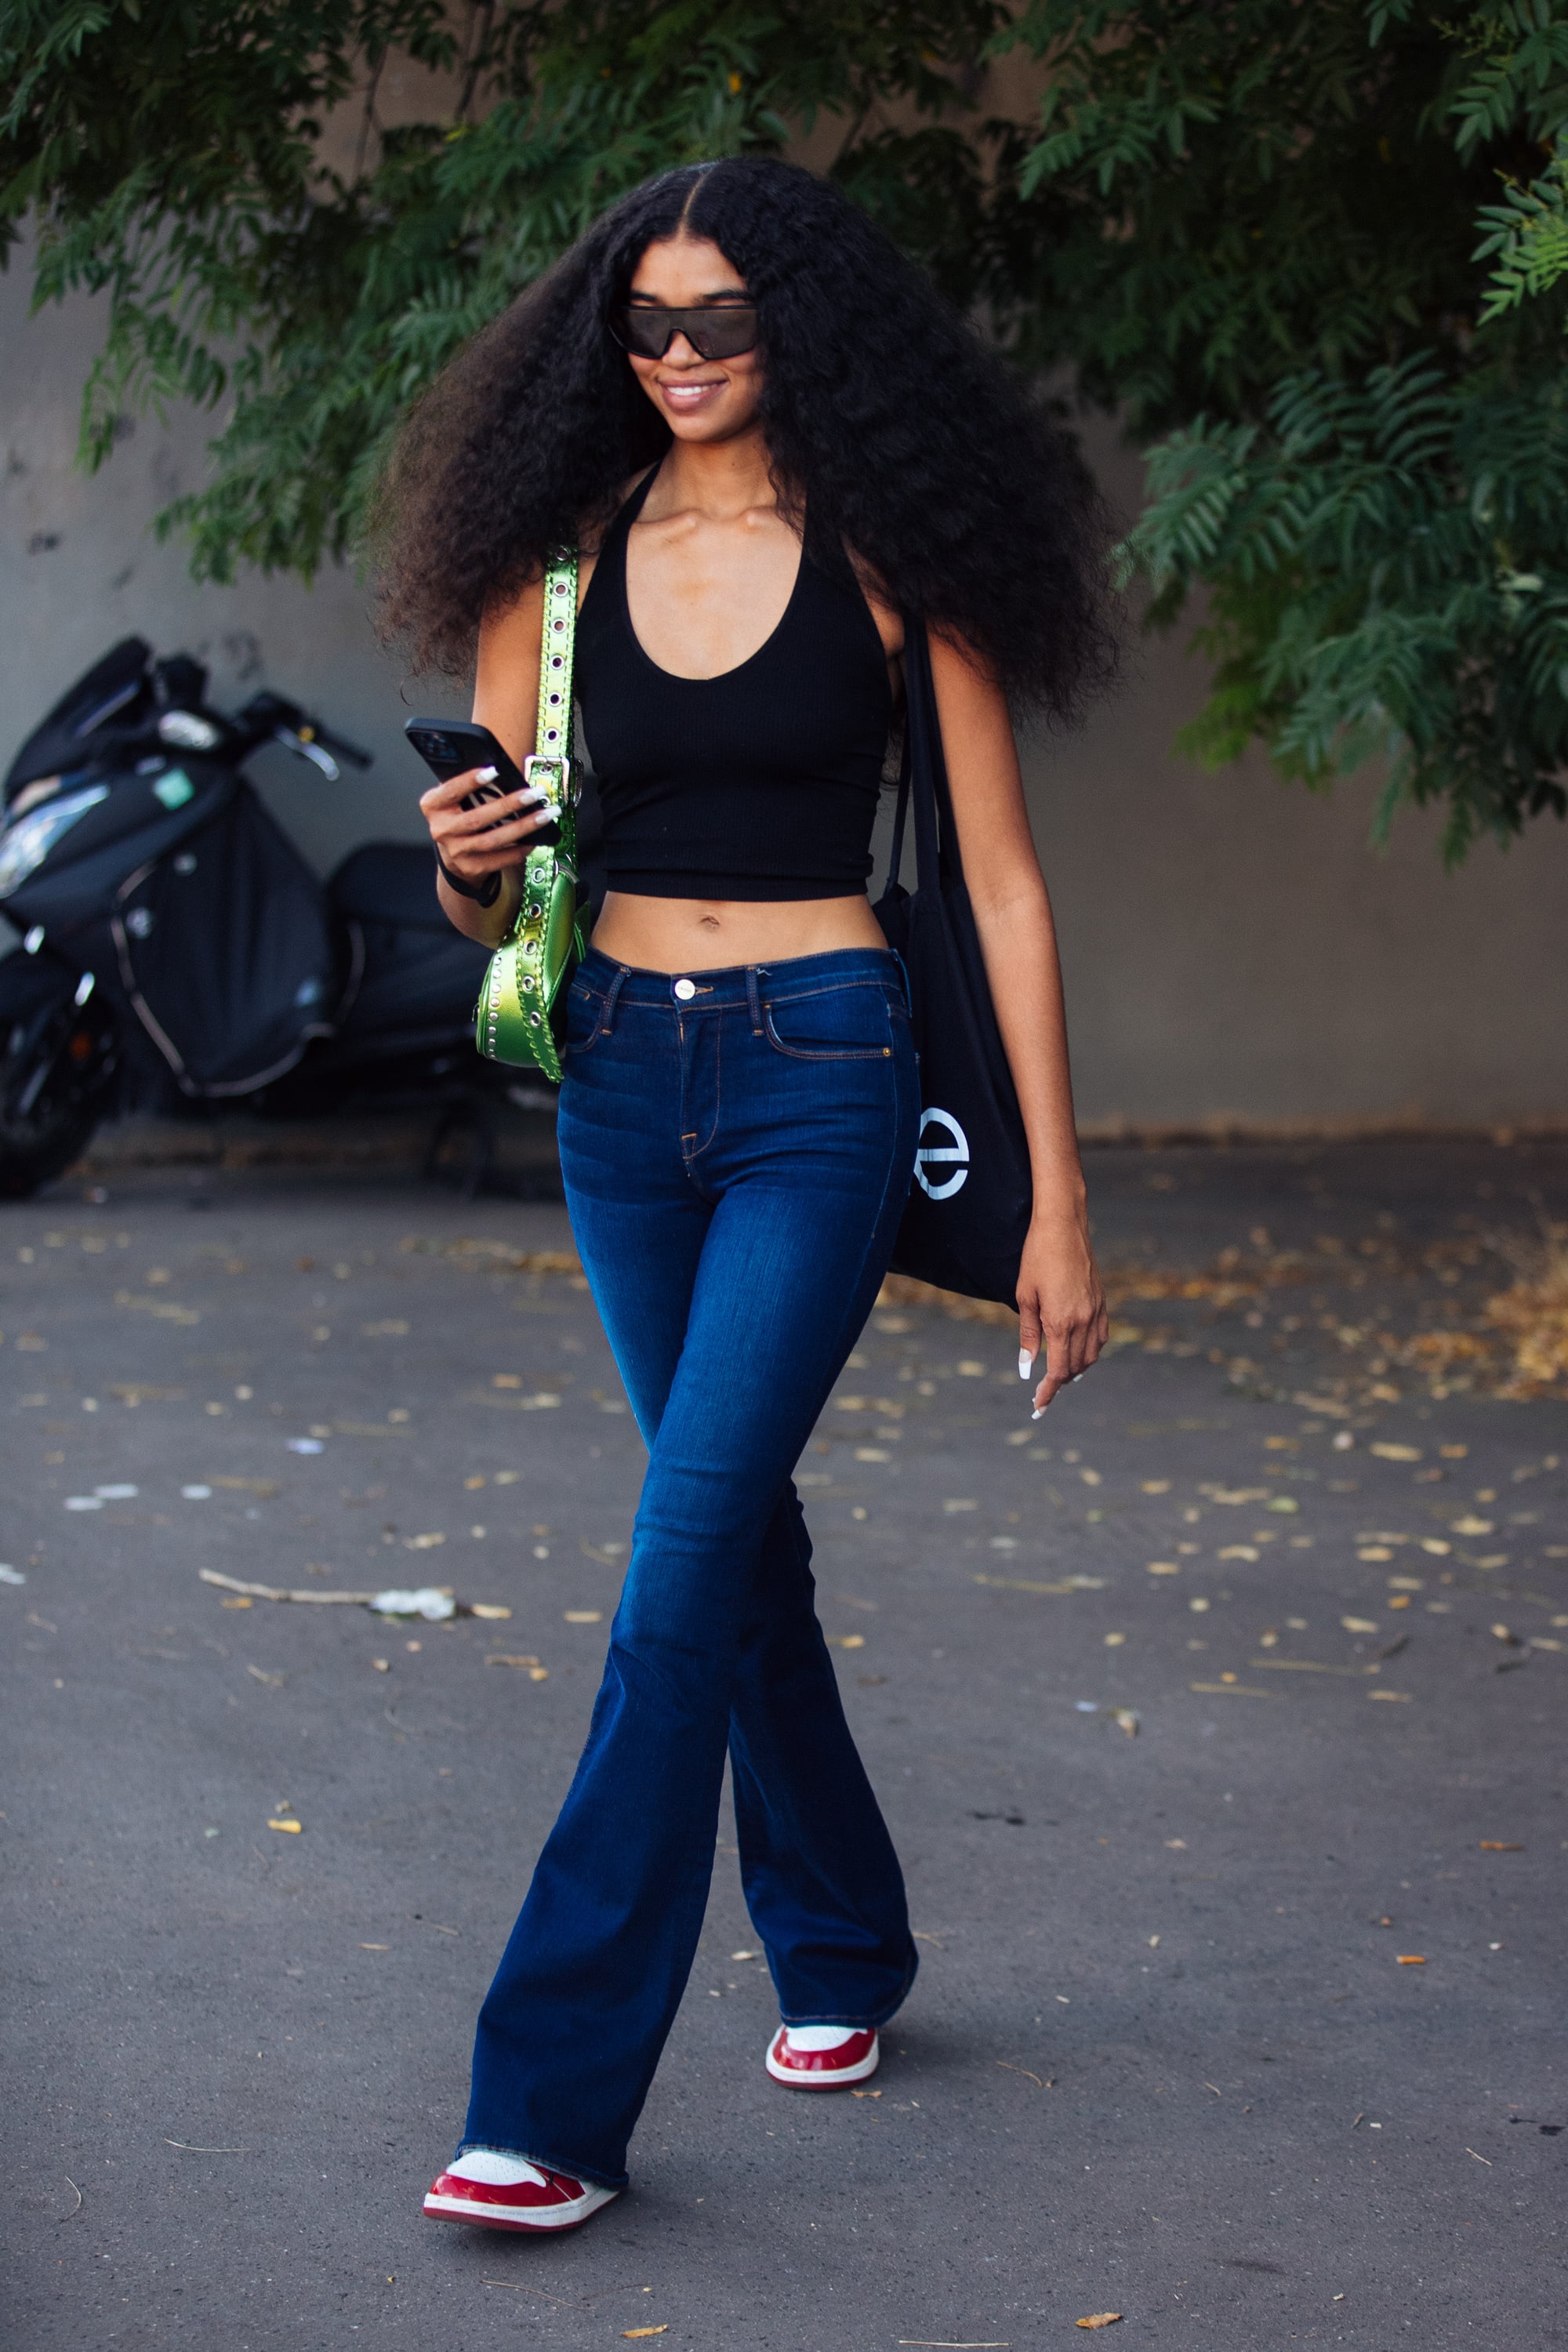 Retro 70s Vibe Outfit: Neon Crop Top with Bell Bottom Jeans